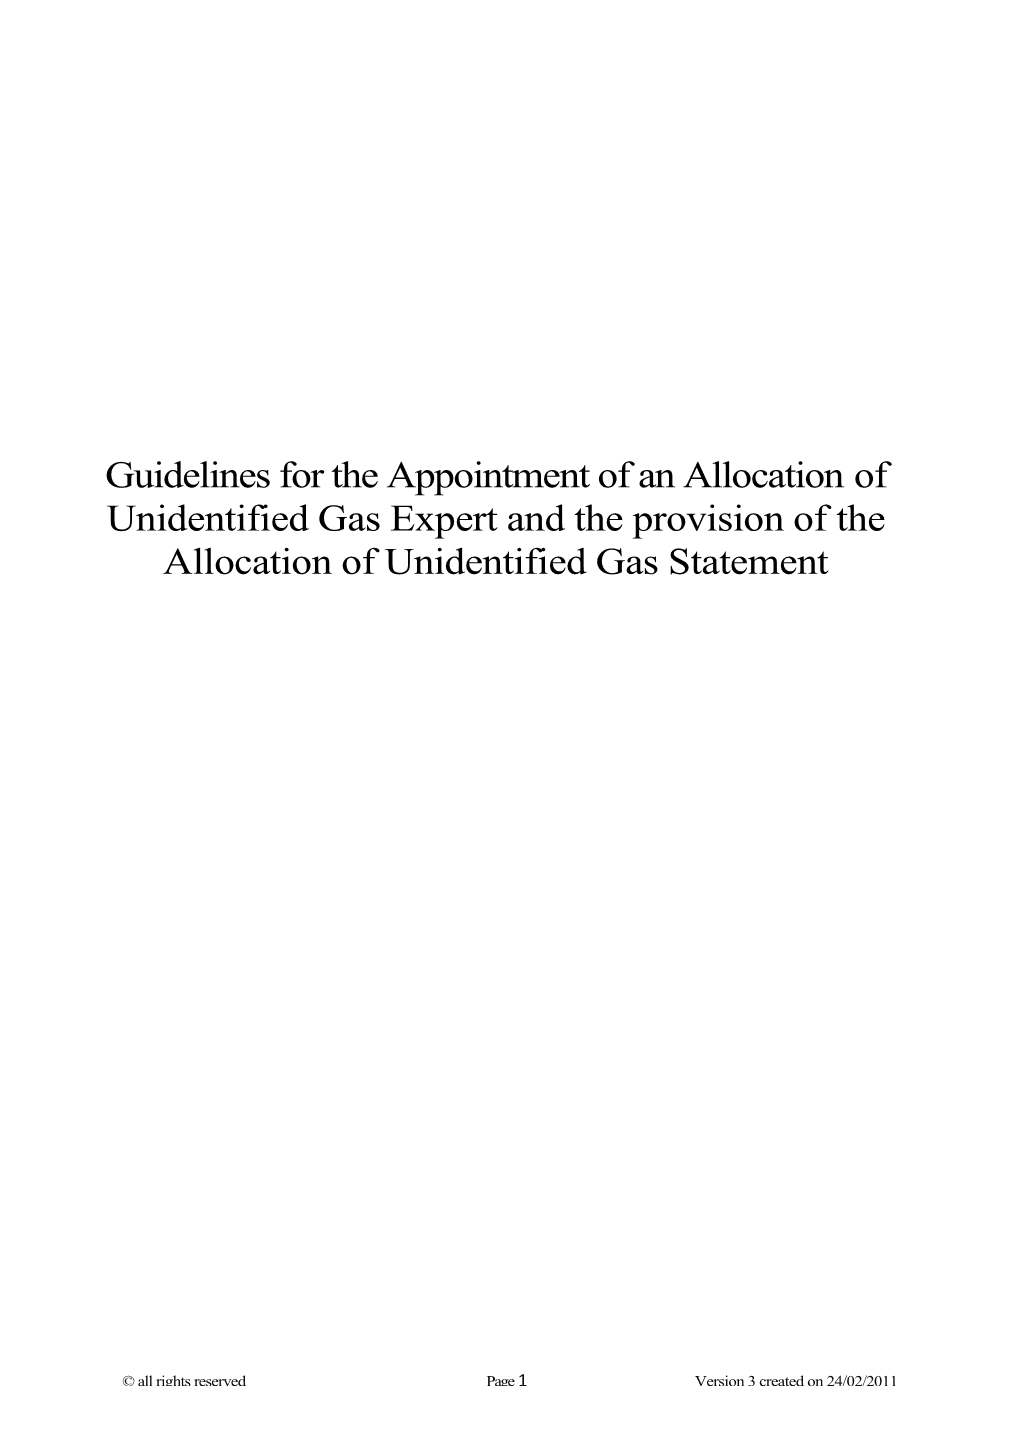 Guidelines for the Appointment of an Allocation